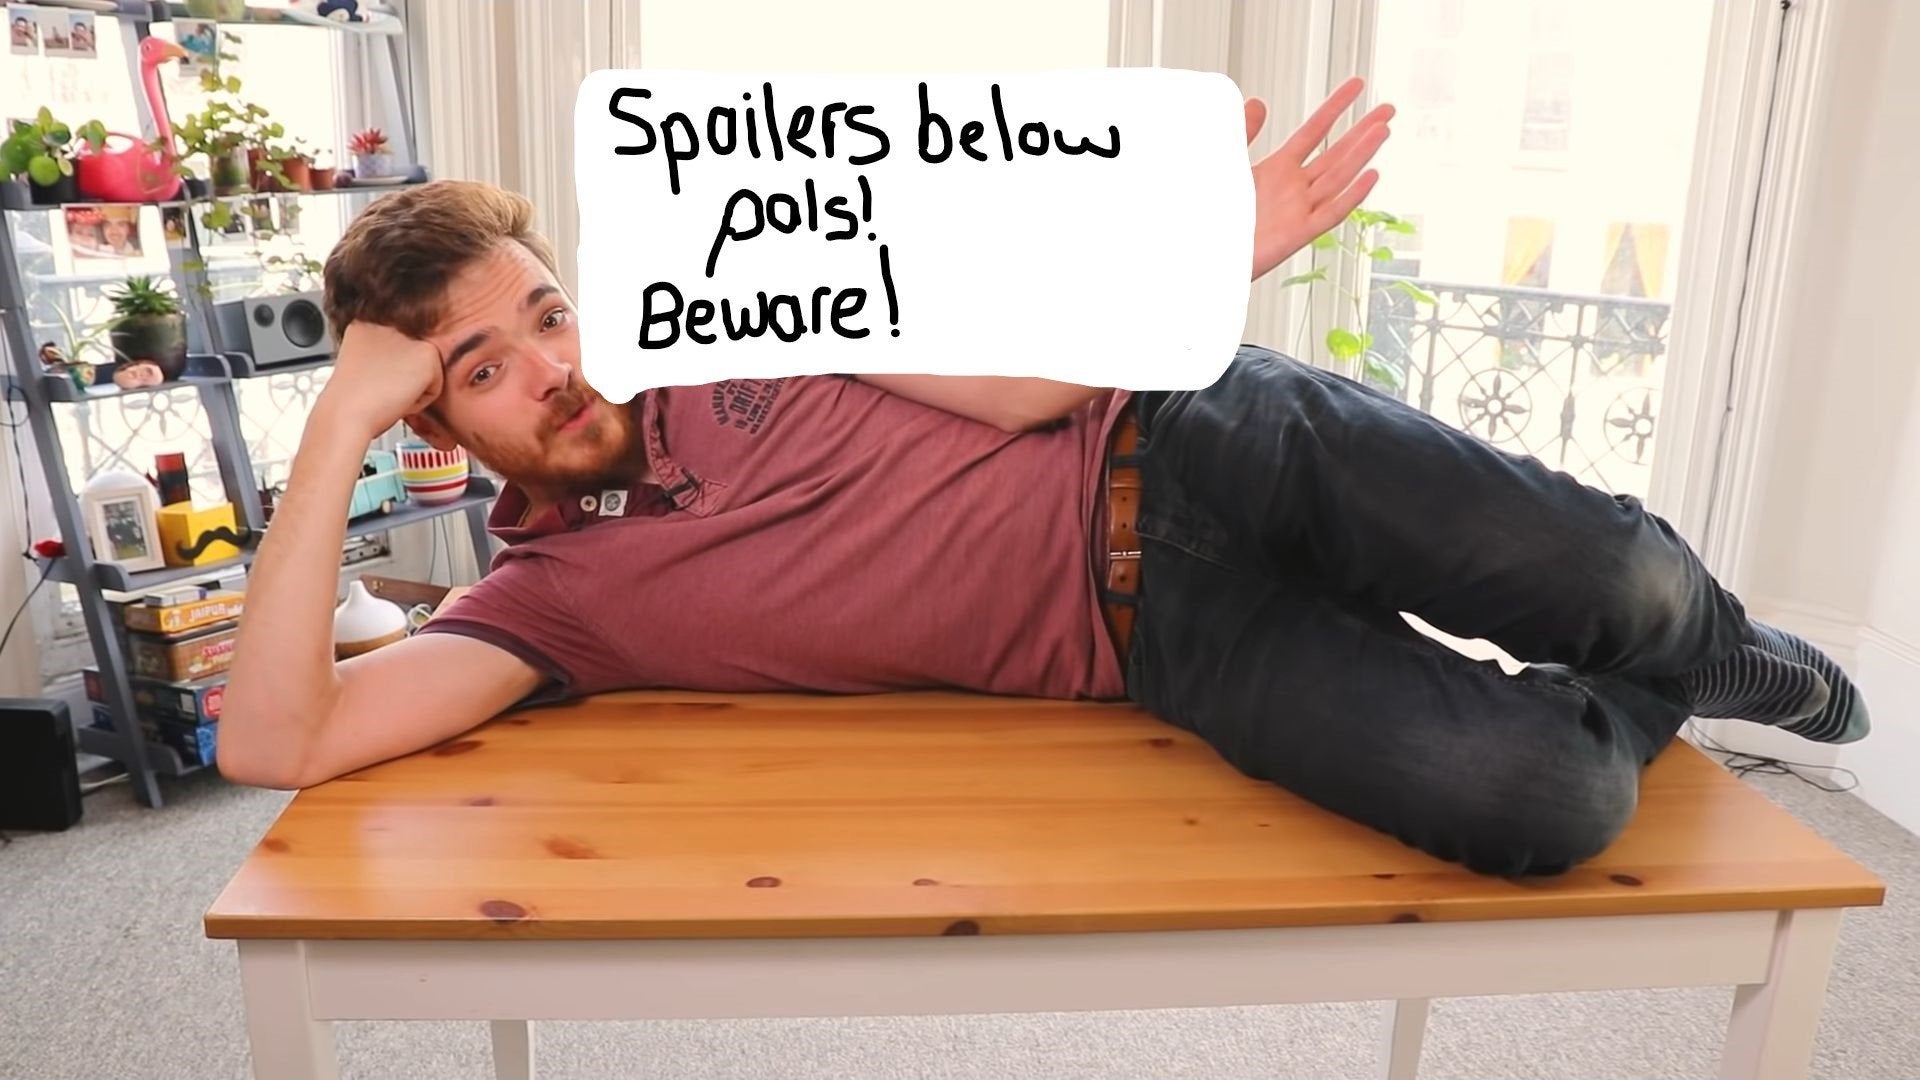 Chris Bratt giving a grave warning about spoilers.